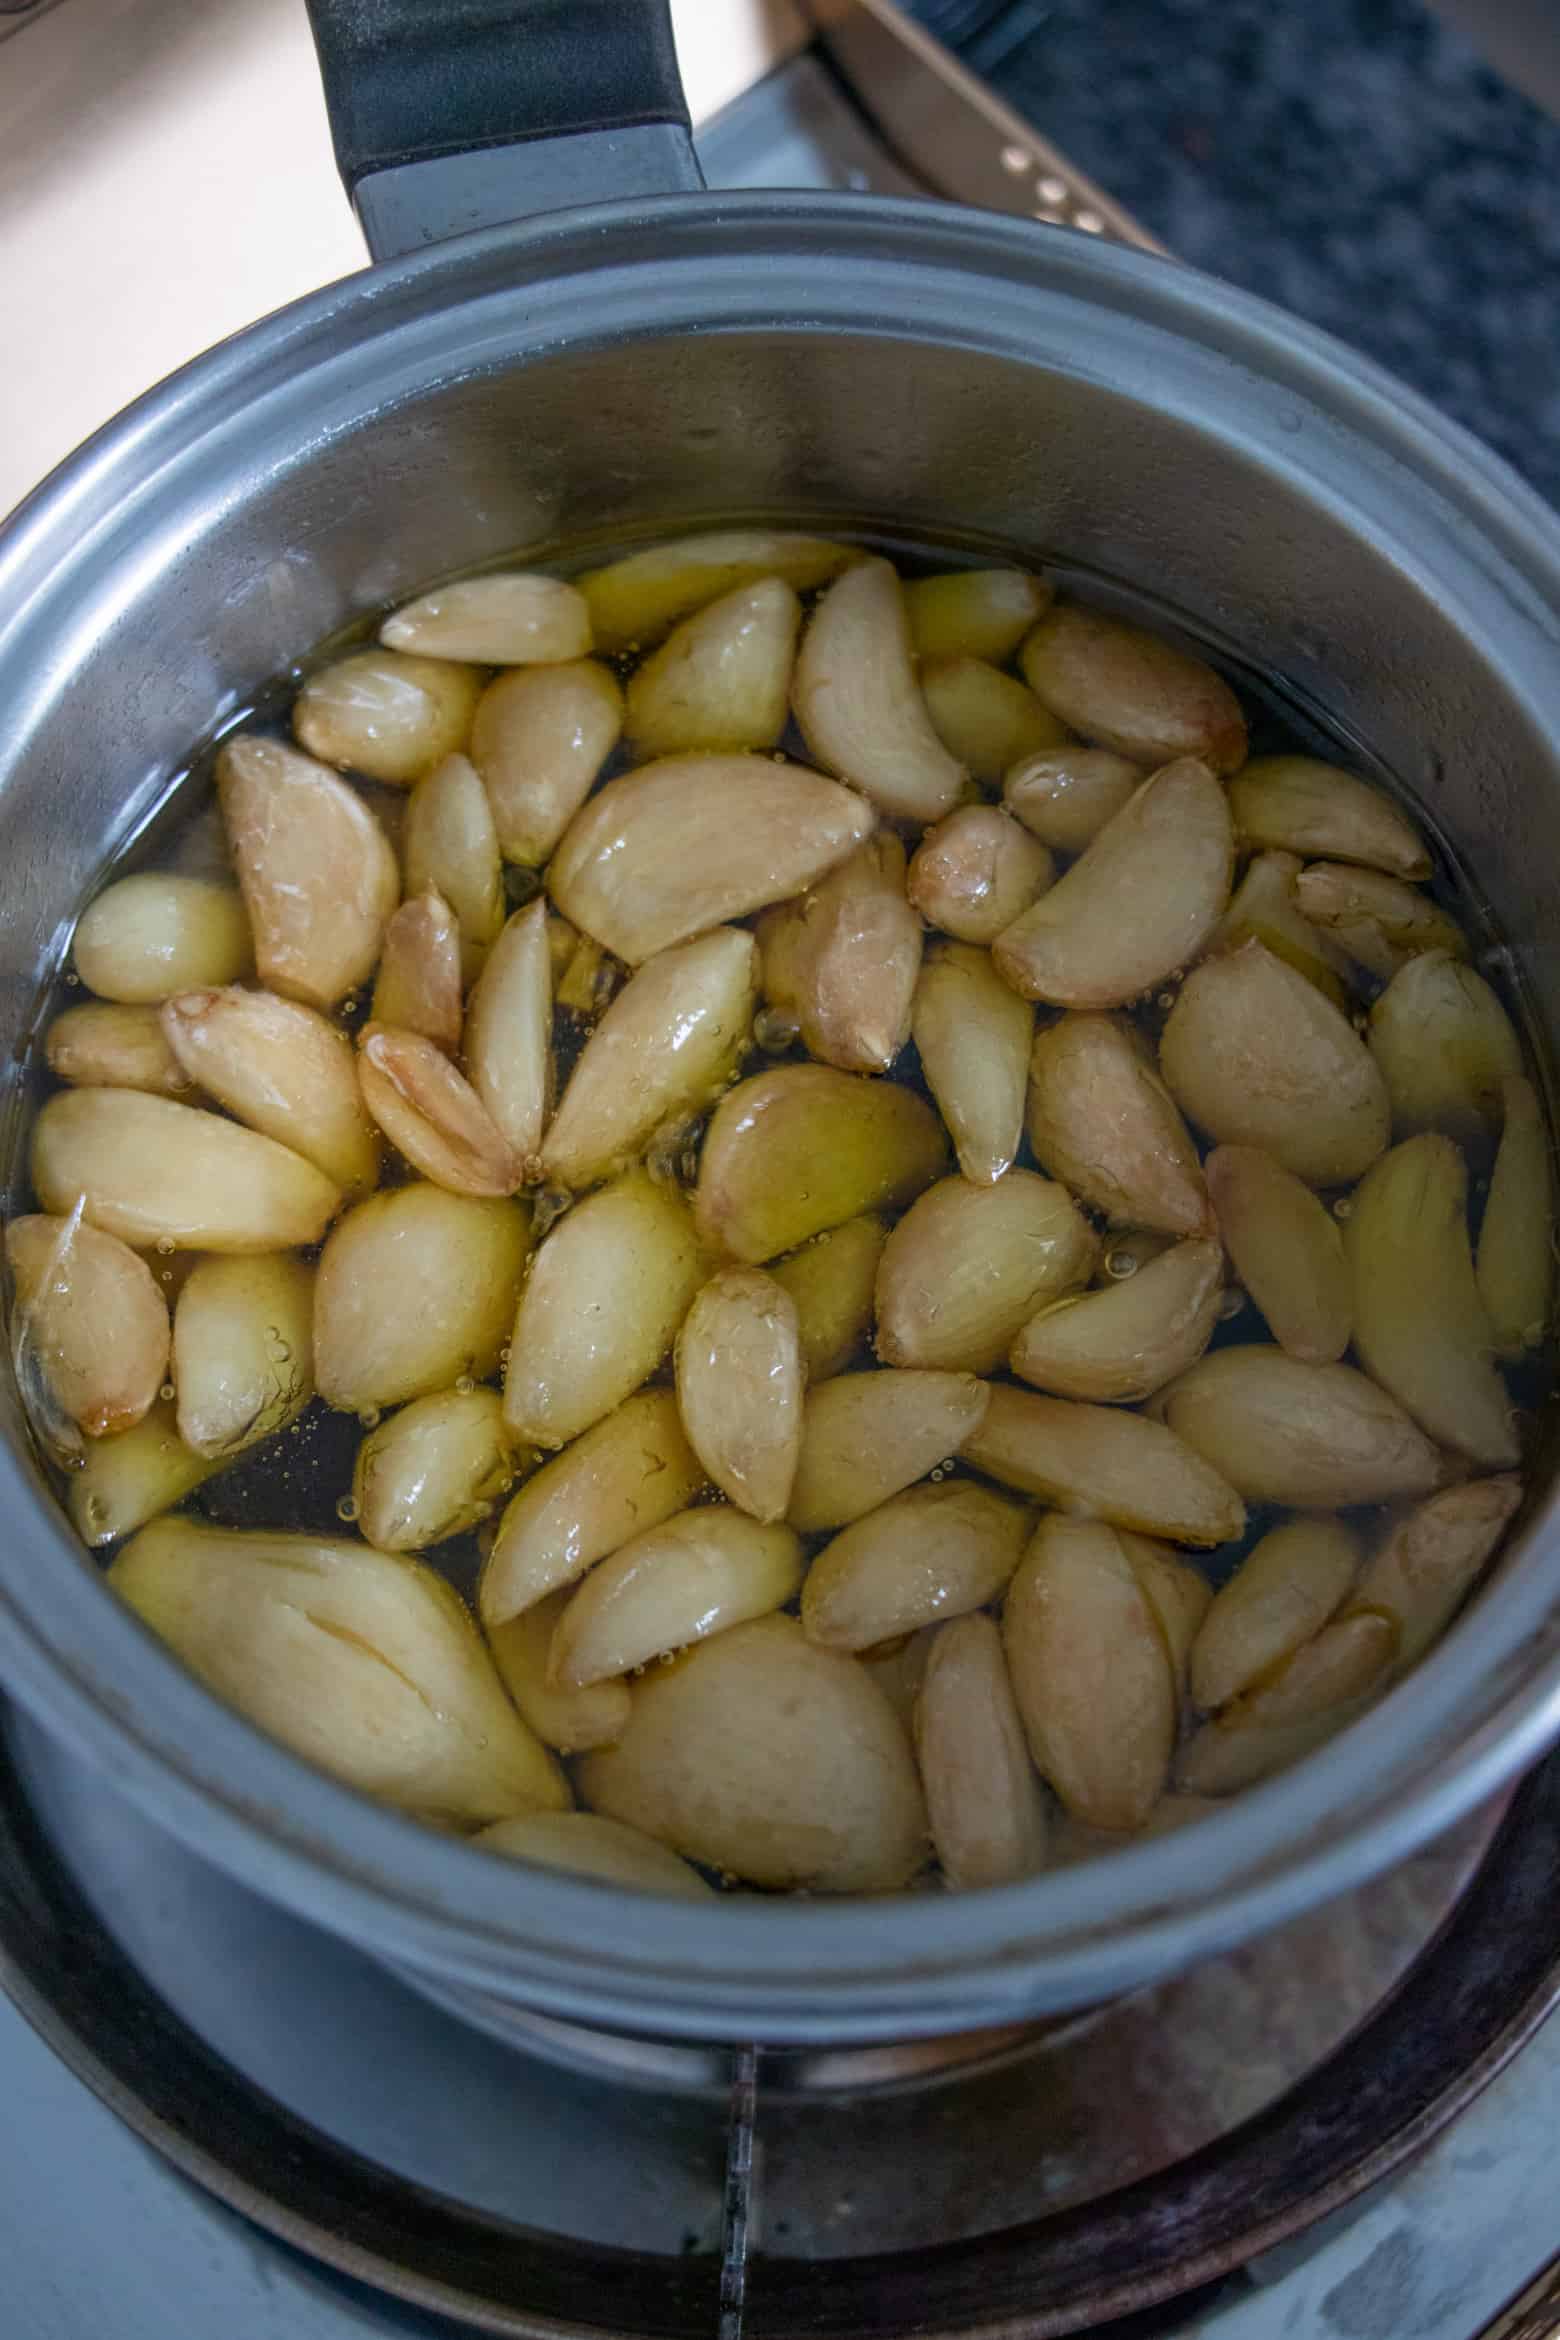 Cooked garlic confit in oil